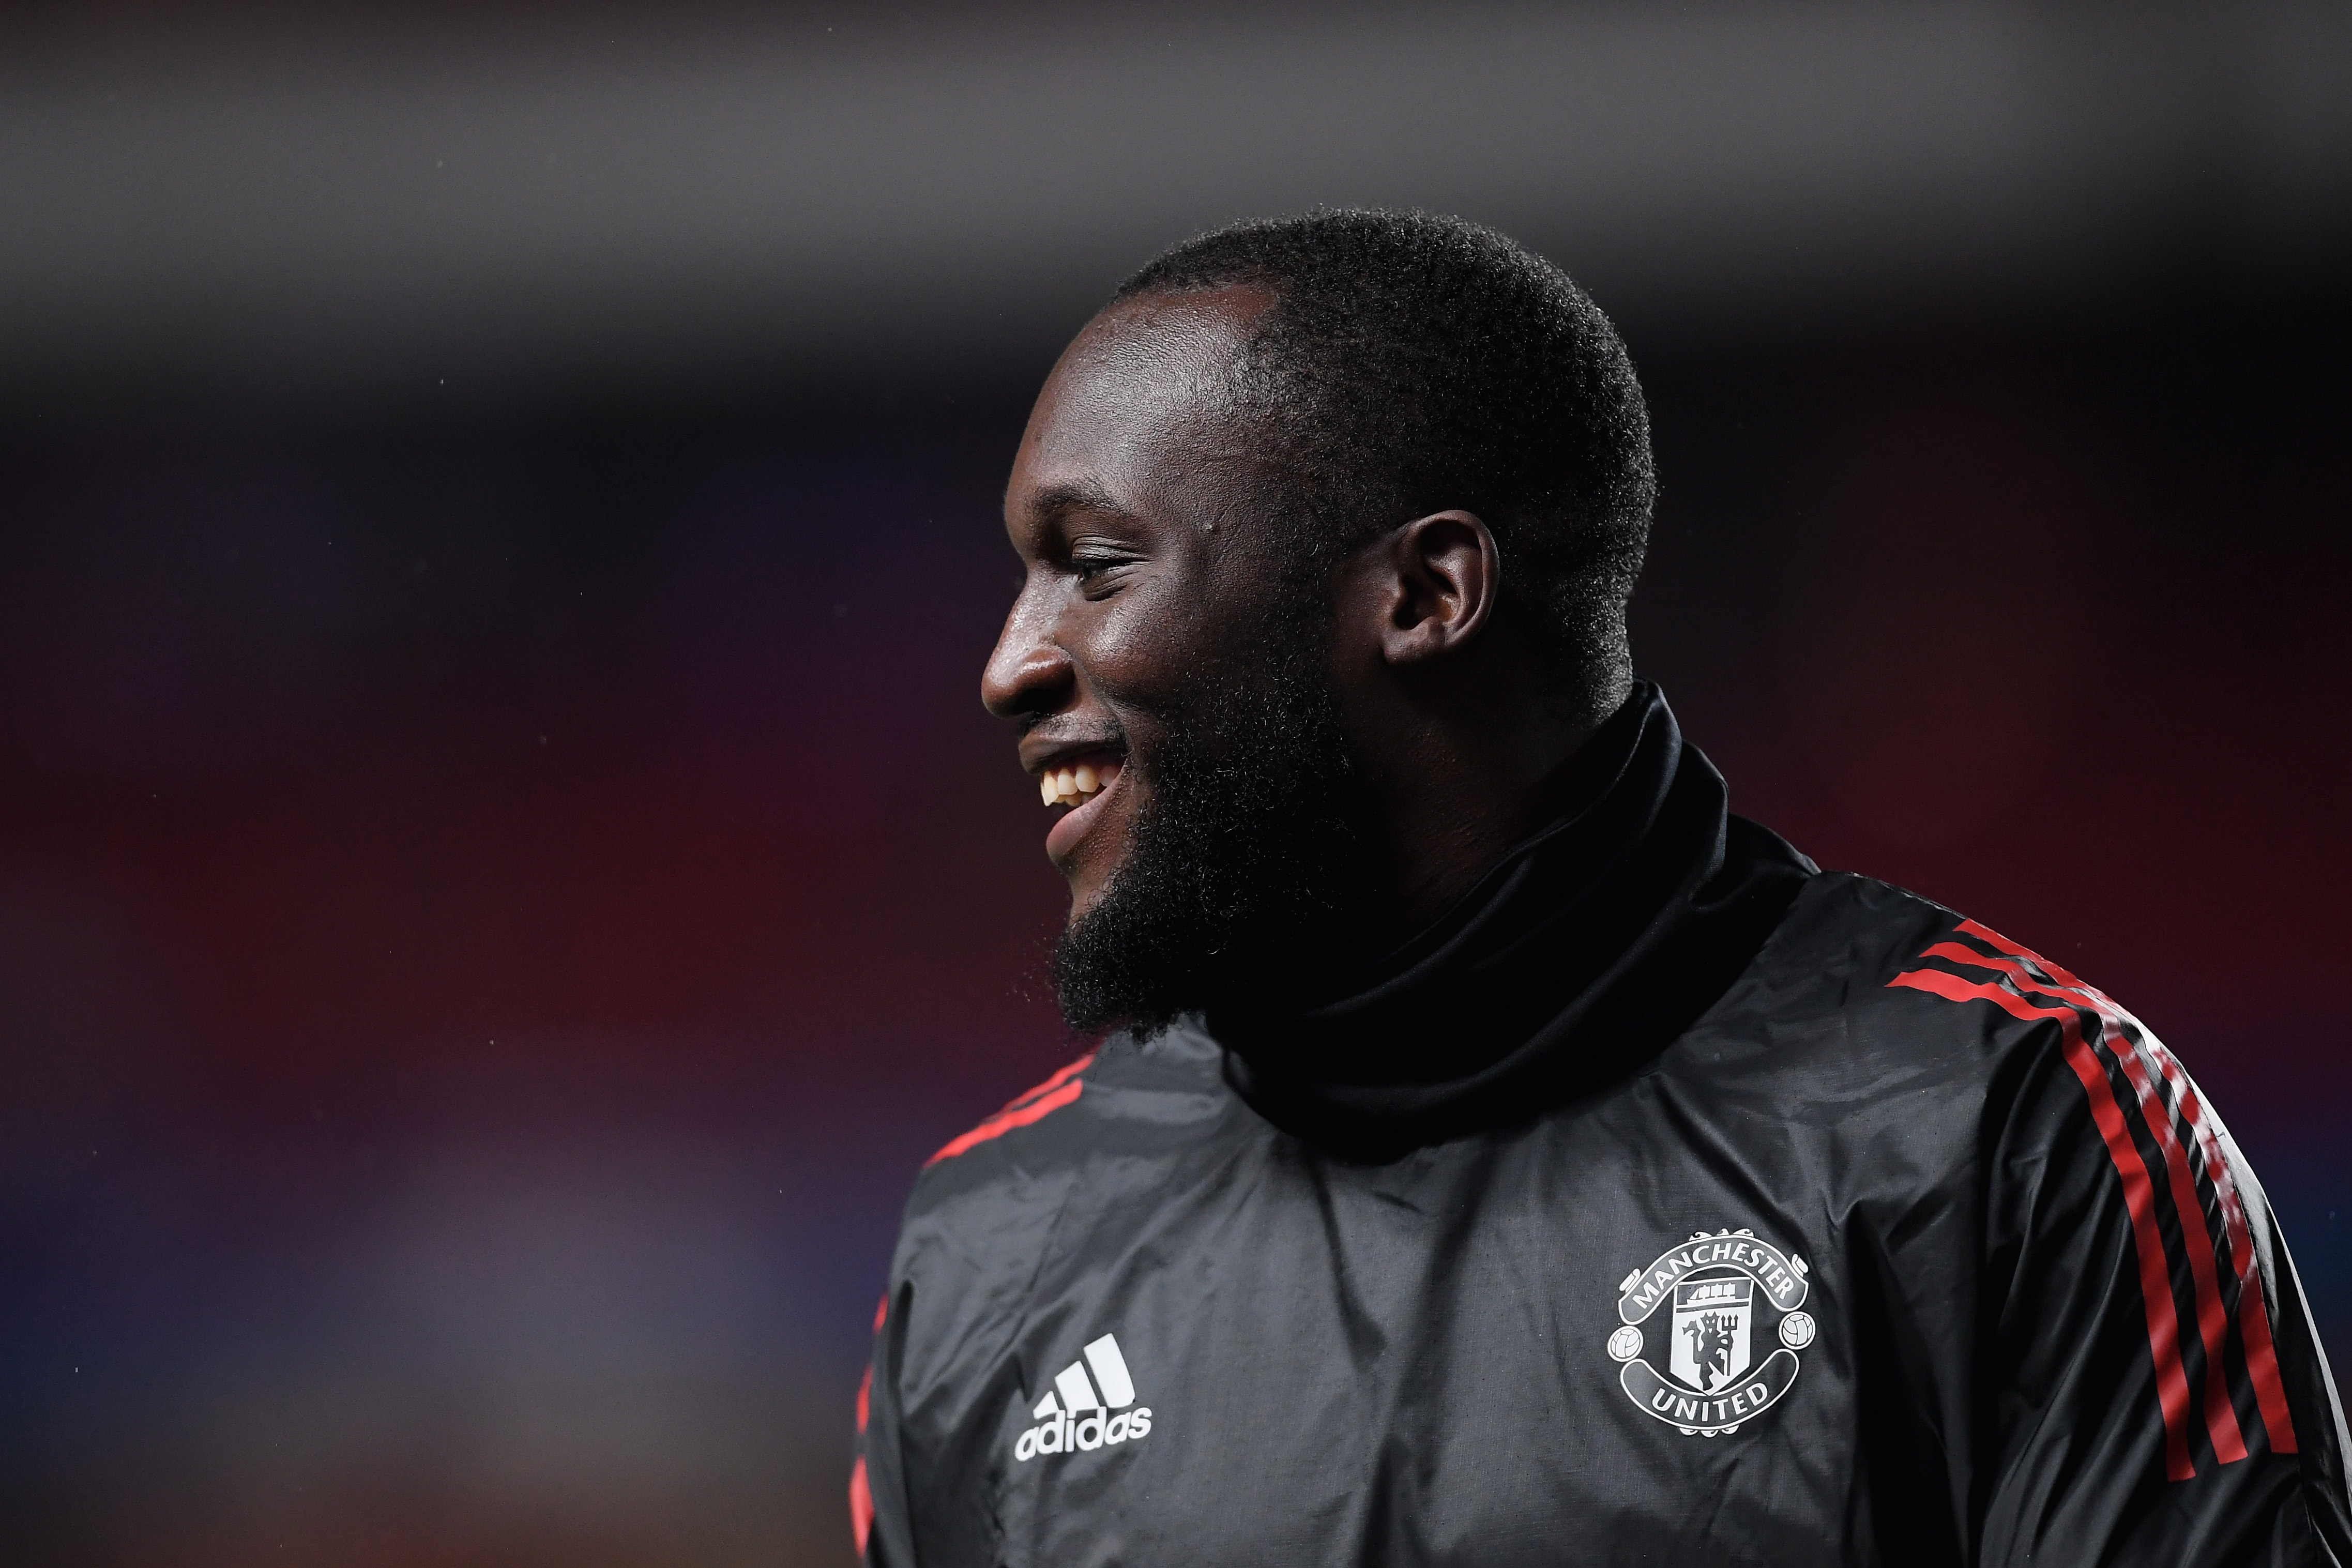 LISBON, PORTUGAL - OCTOBER 18:  Romelu Lukaku of Manchester United warms up prior tothe UEFA Champions League group A match between SL Benfica and Manchester United at Estadio da Luz on October 18, 2017 in Lisbon, Portugal.  (Photo by Laurence Griffiths/Getty Images)